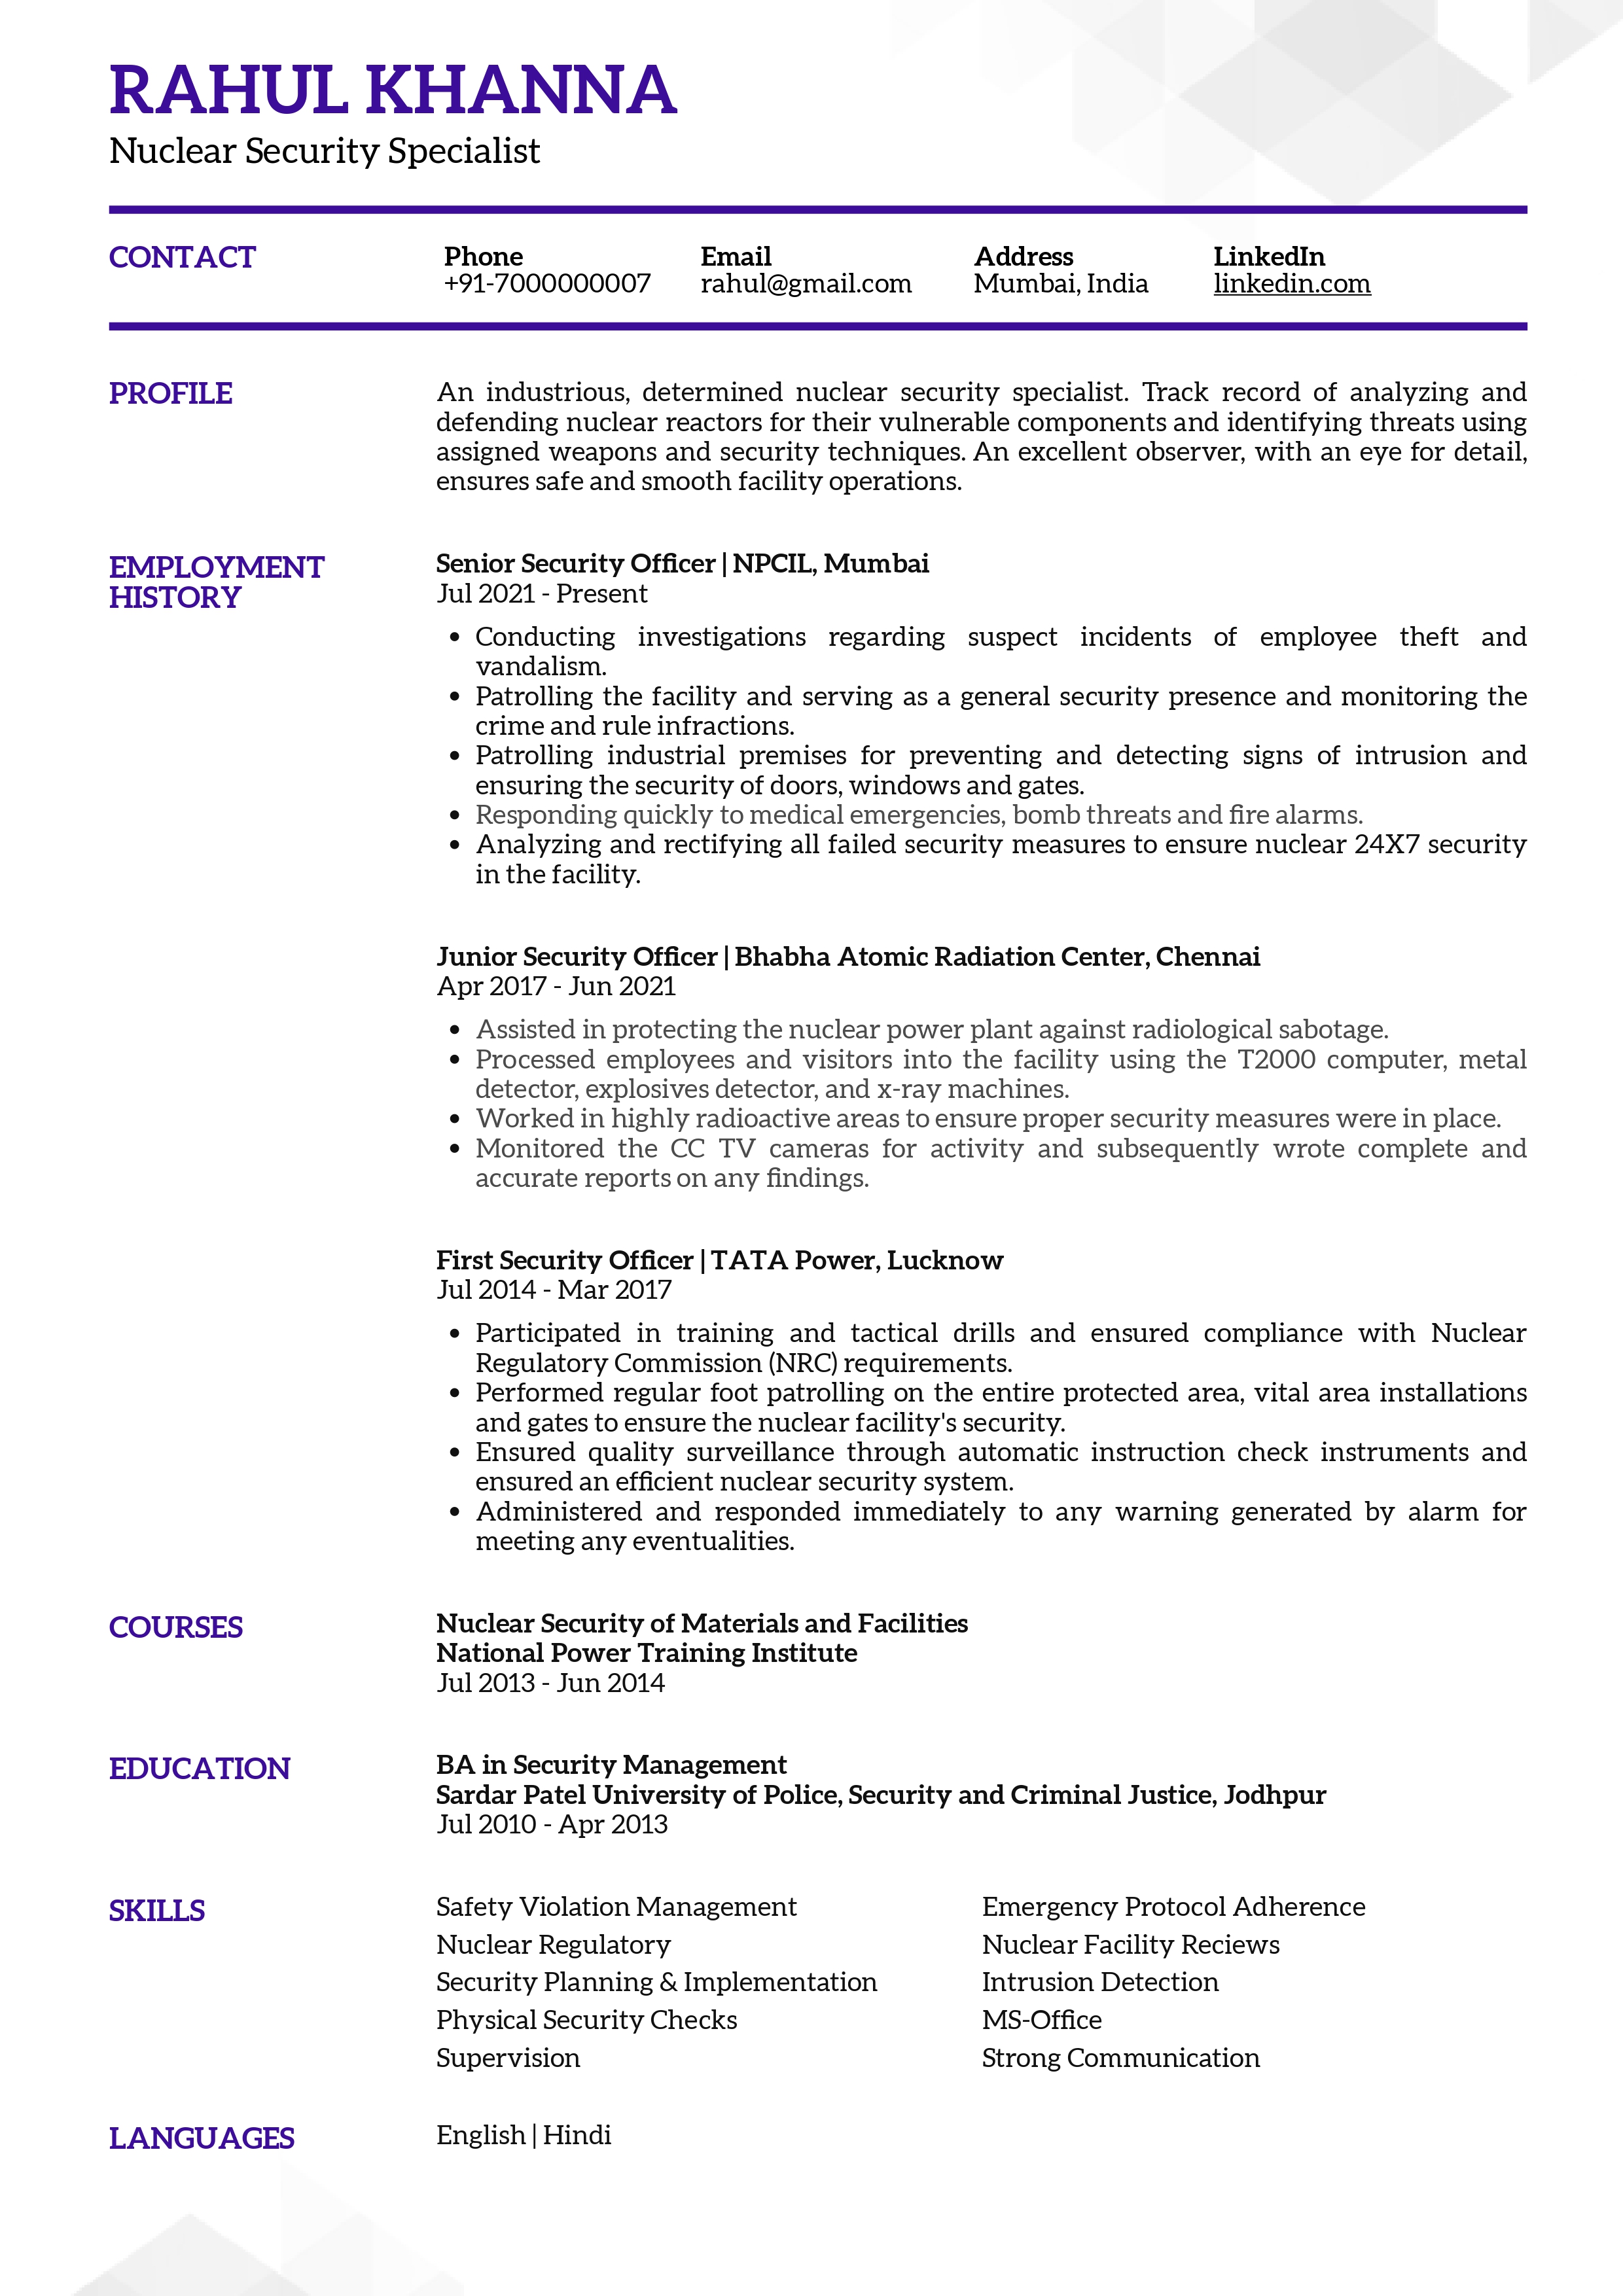 Sample Resume of Nuclear Security Specialist | Free Resume Templates & Samples on Resumod.co